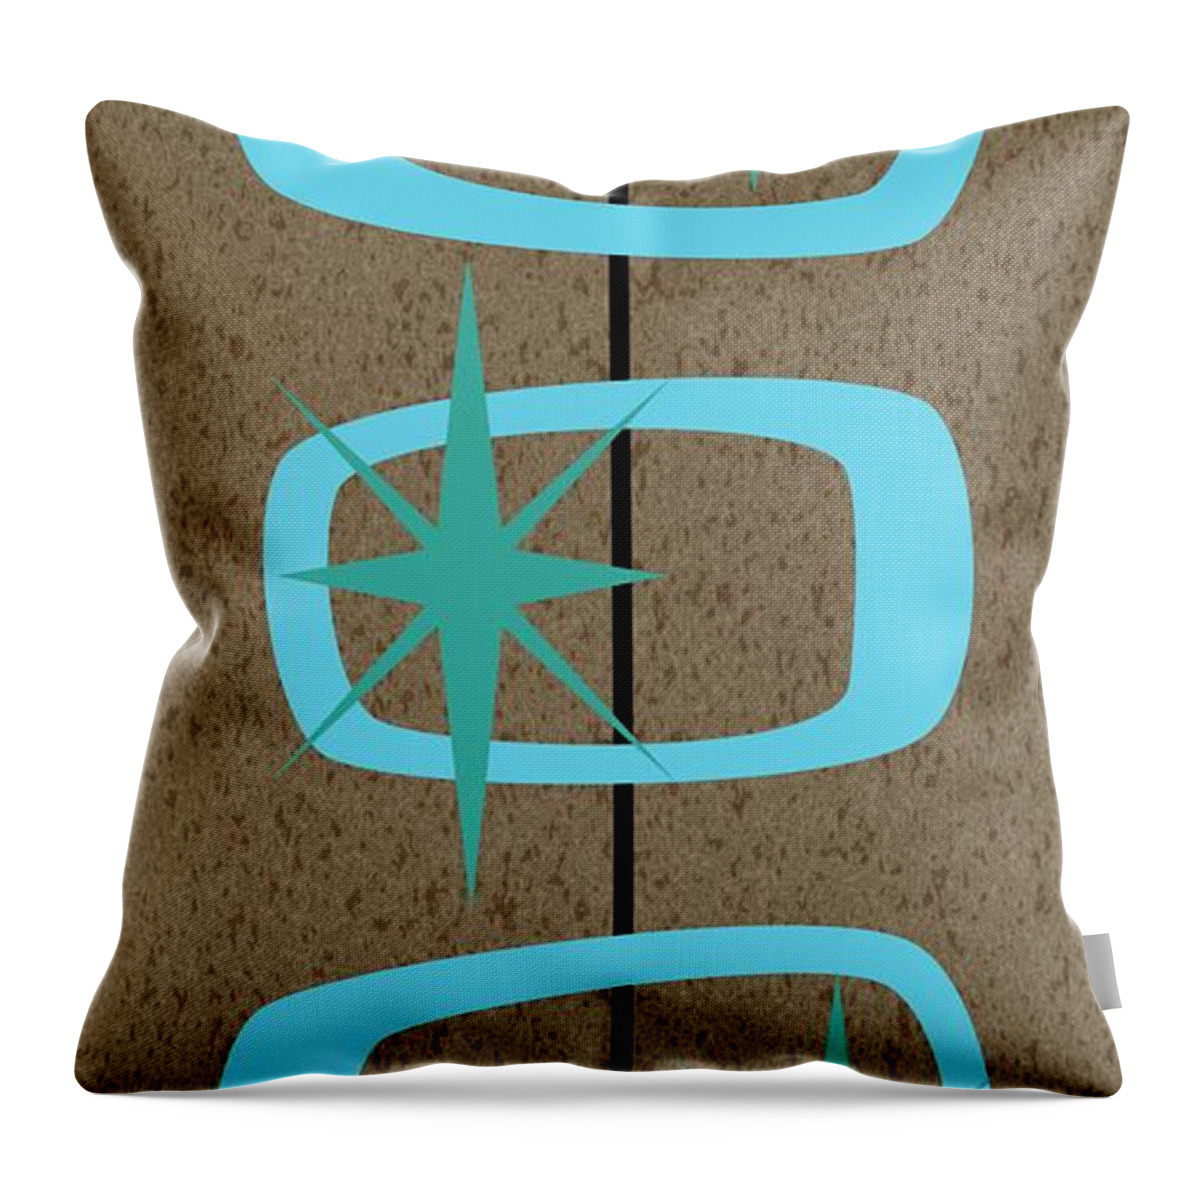 Turquoise Throw Pillow featuring the digital art Mid Century Modern Shapes 1 by Donna Mibus